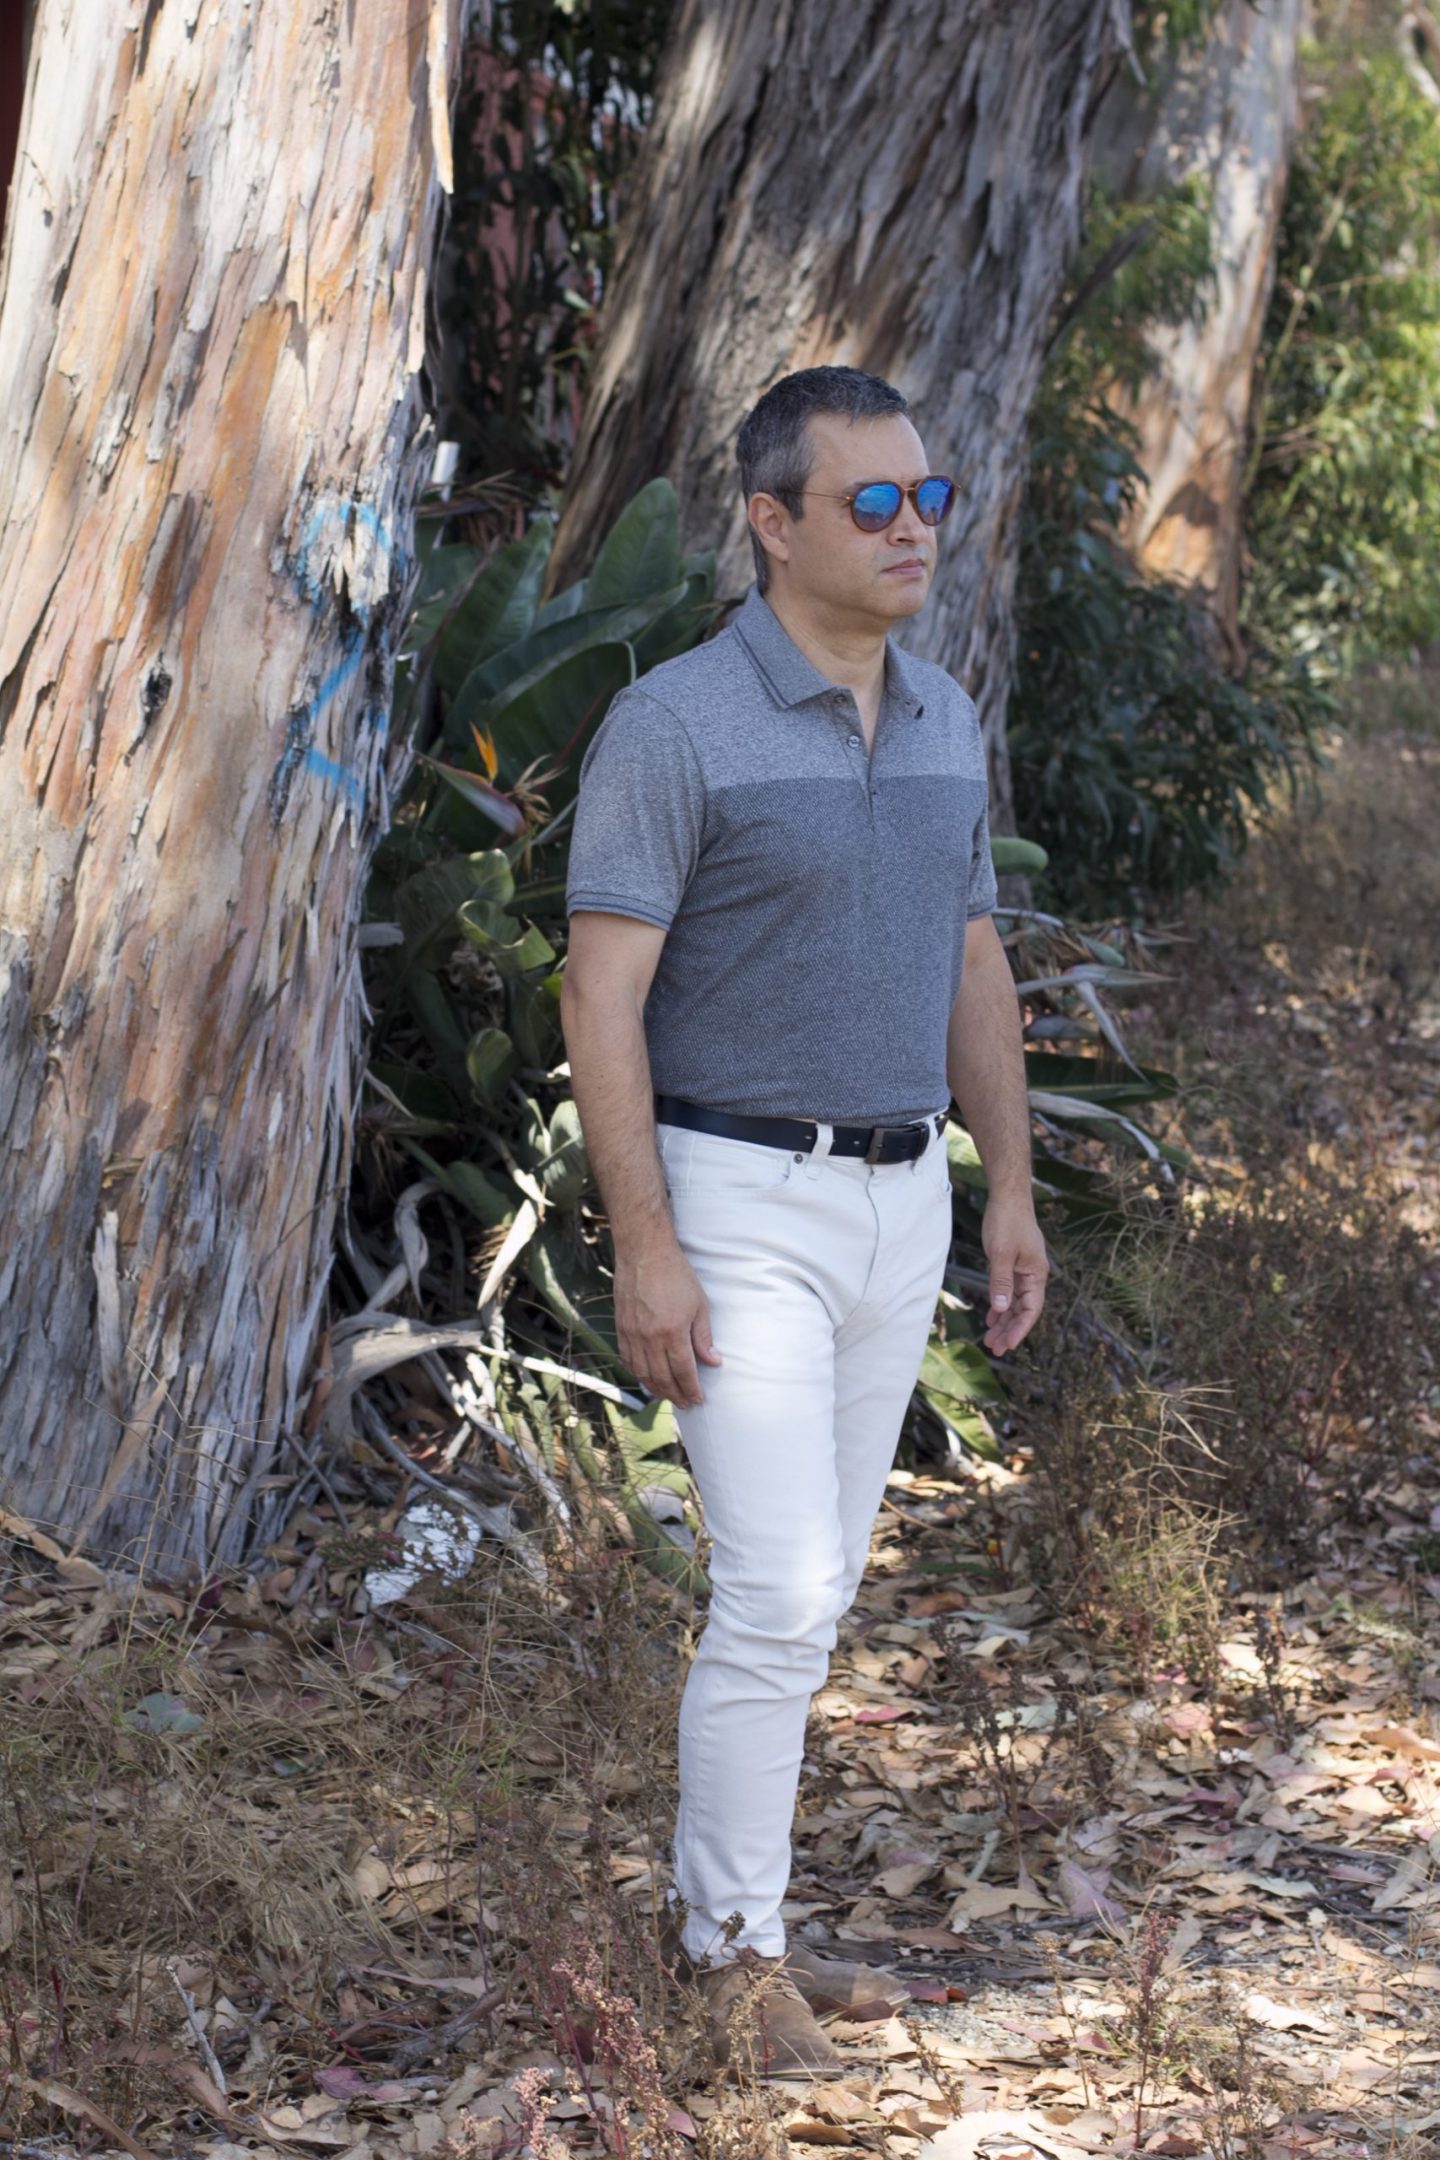 Marks & Spencer cotton blend textured polo shirt, blue leather buckle reversible belt, skinny fit stretch jeans, and suede desert lace-up shoes